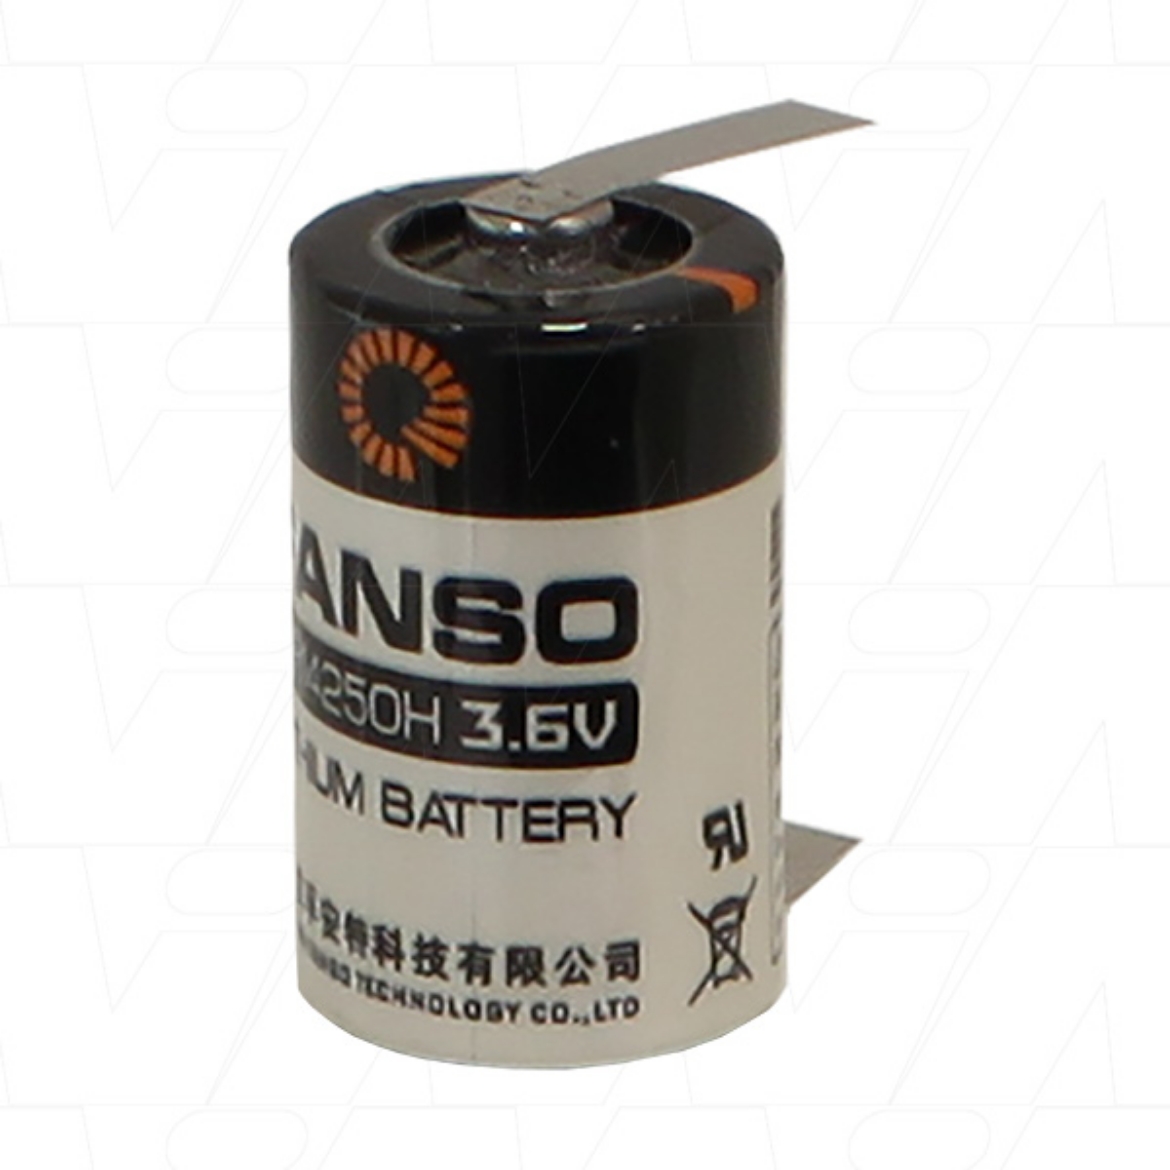 Picture of FANSO 1/2AA 3.6V 1.2AH LISOC12-LITHIUM BATTERY WITH SOLDER TABS